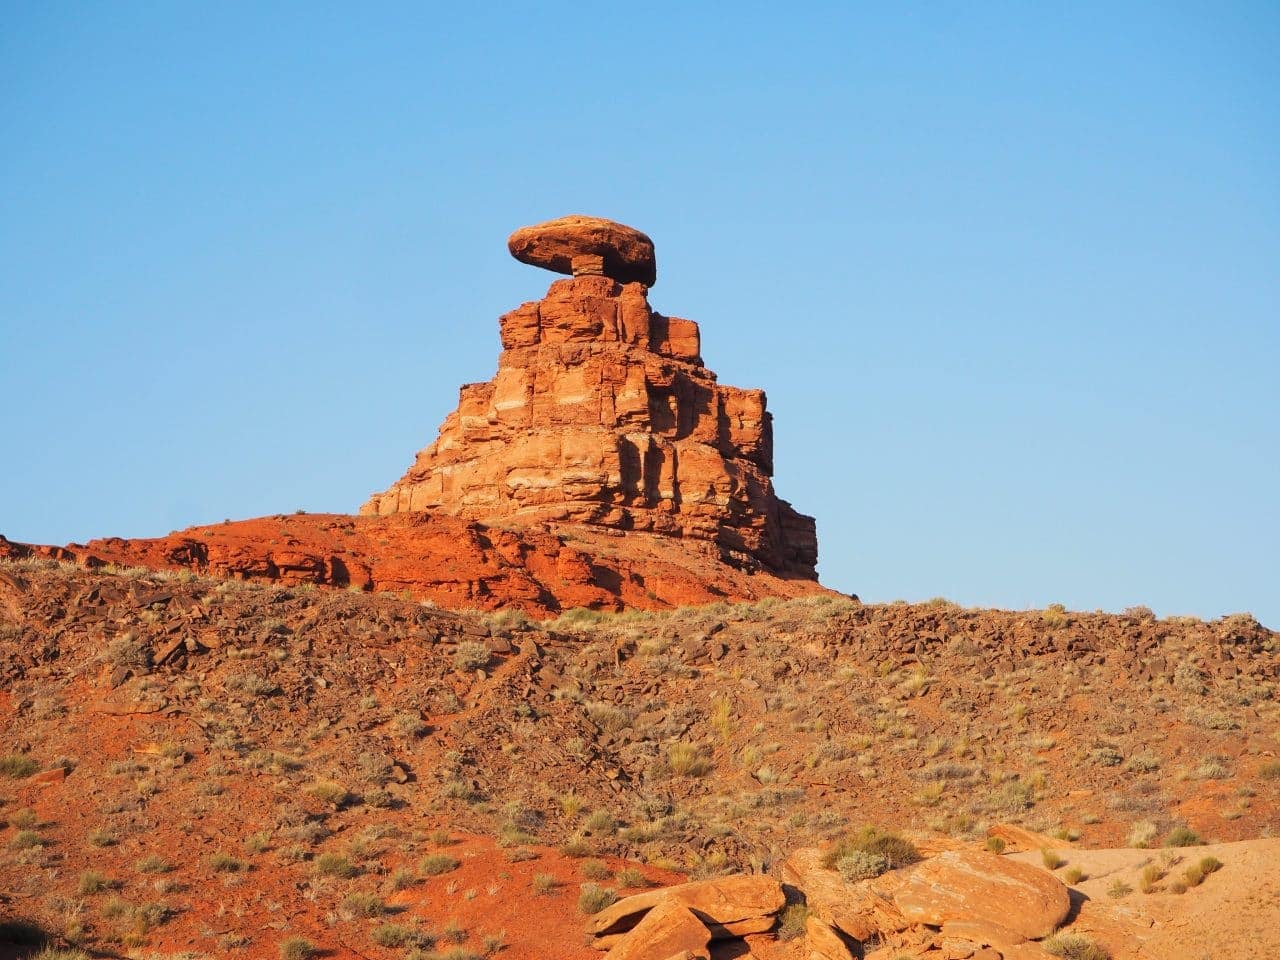 The Mexican Hat rock formation